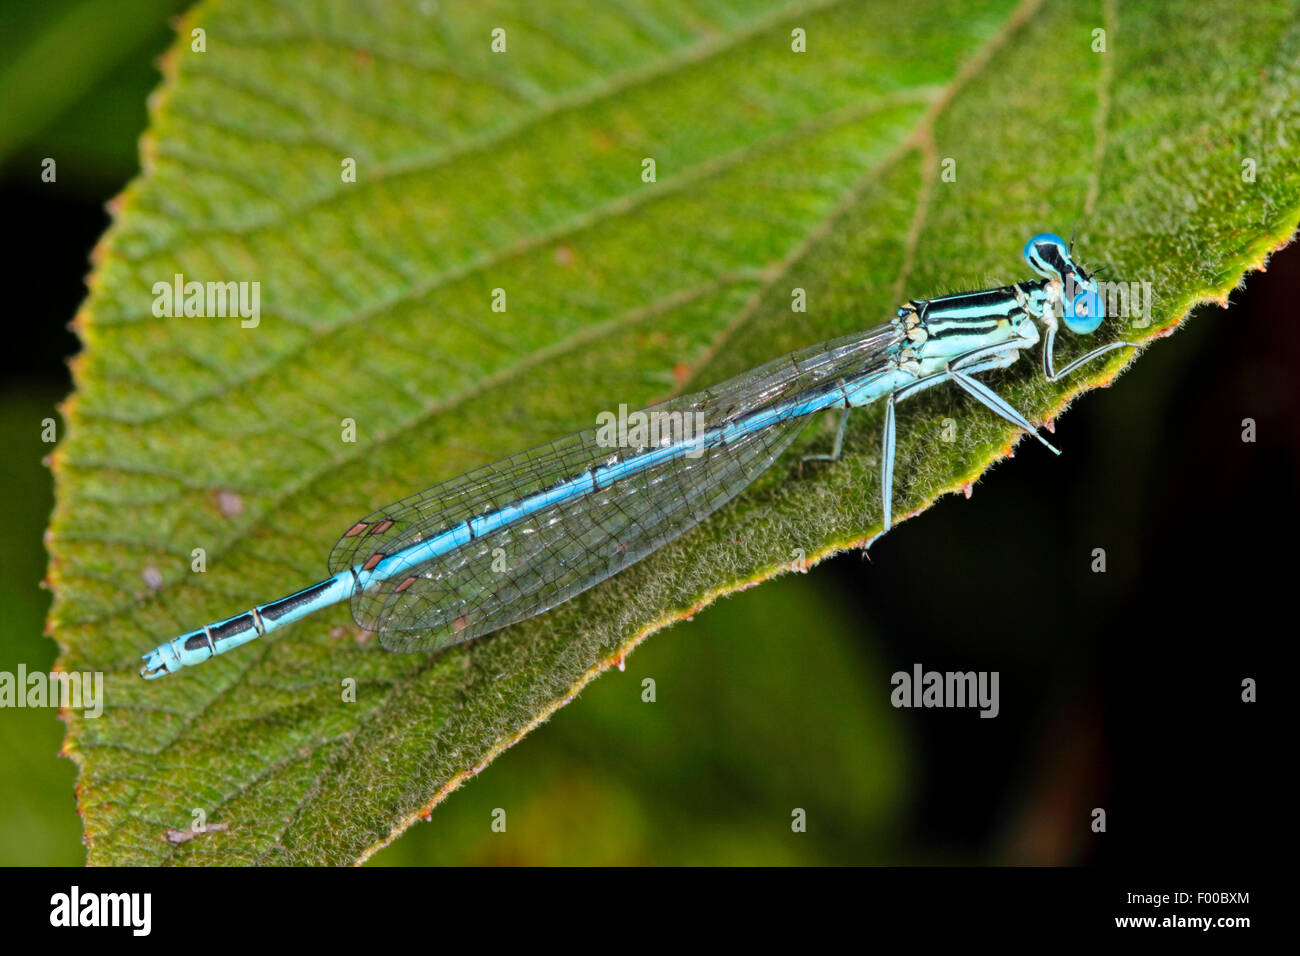 white-legged damselfly (Platycnemis pennipes), male on a leaf, Germany Stock Photo